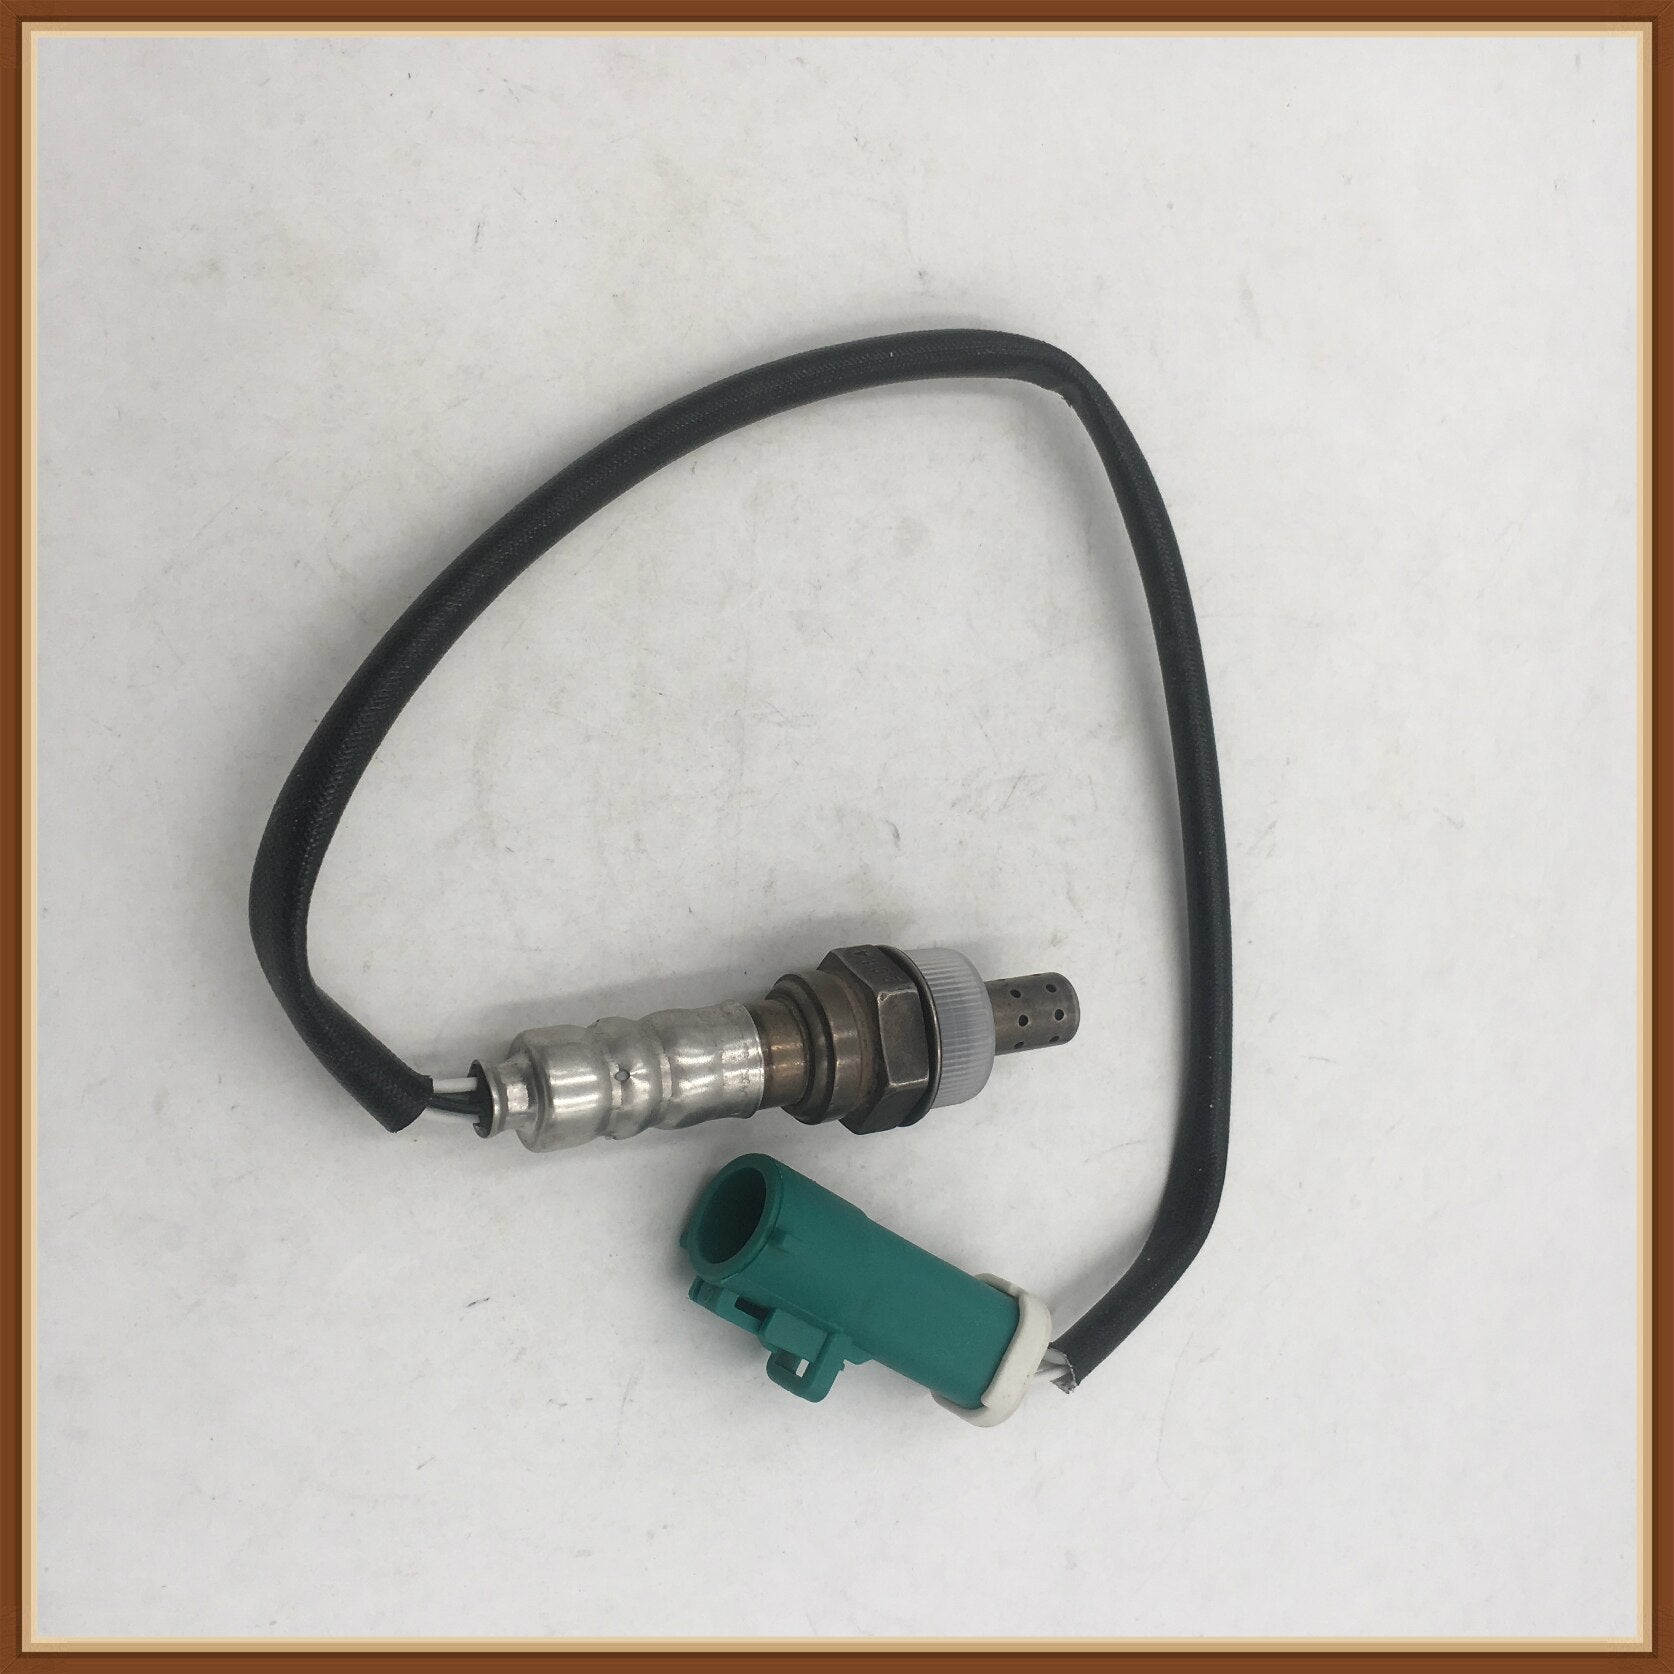 Oxygen Sensor O2 Front 2S6A-9F472-BB For Fiesta-Ford KA 1.3 i Cougar-Mazda 1.25 1.4 Pre-Cat 48cm Auto Replacement Parts